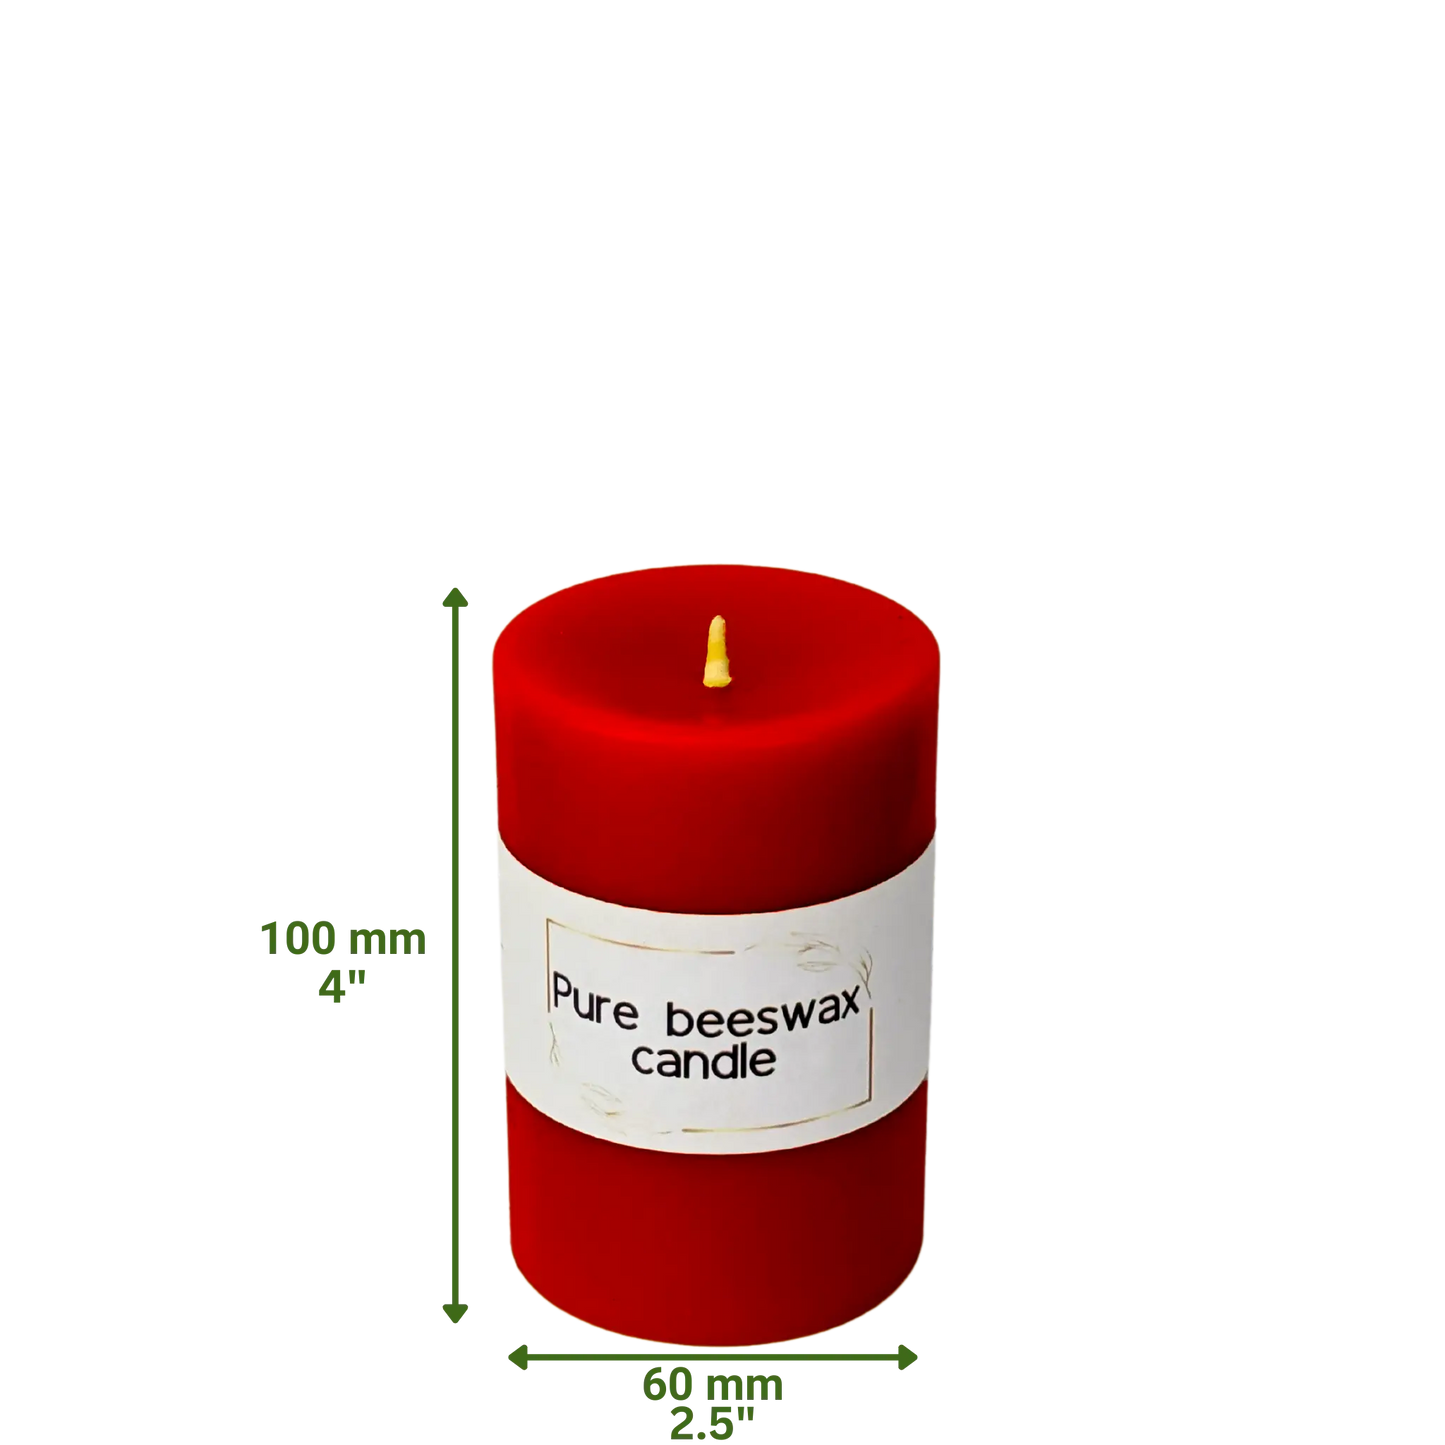 Scented red pillar candles enhance room decor with subtle aroma and sophisticated look.